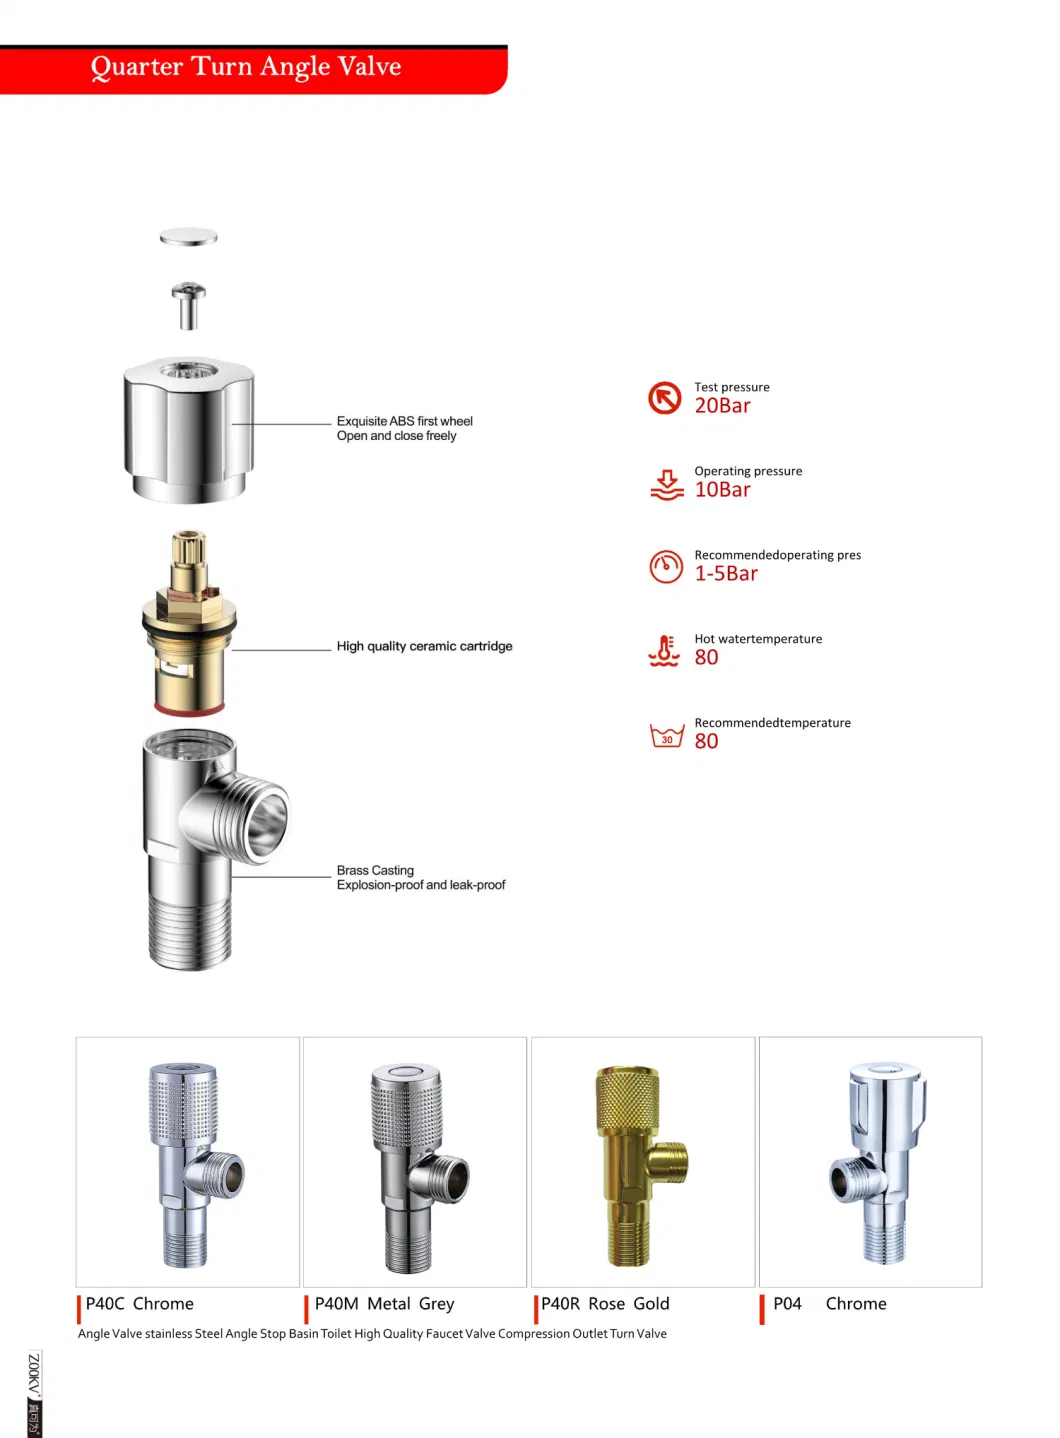 Stainless Steel Wheel Triangle Valve Bathroom Toilet Water Stop Valve Switch Kitchen Faucet Triangle Valve Tool Accessories